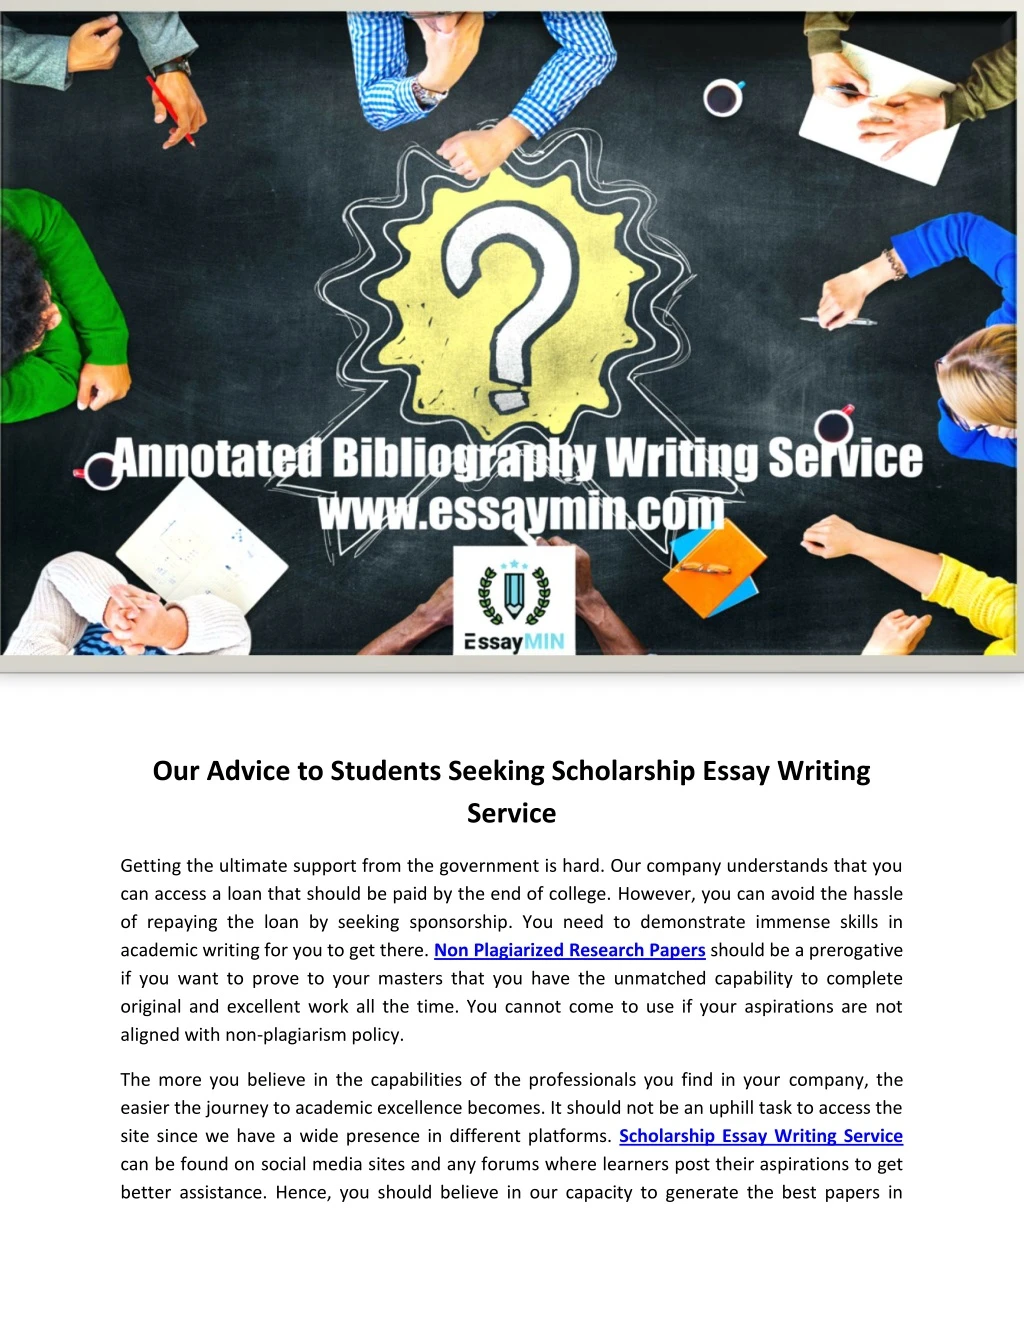 our advice to students seeking scholarship essay